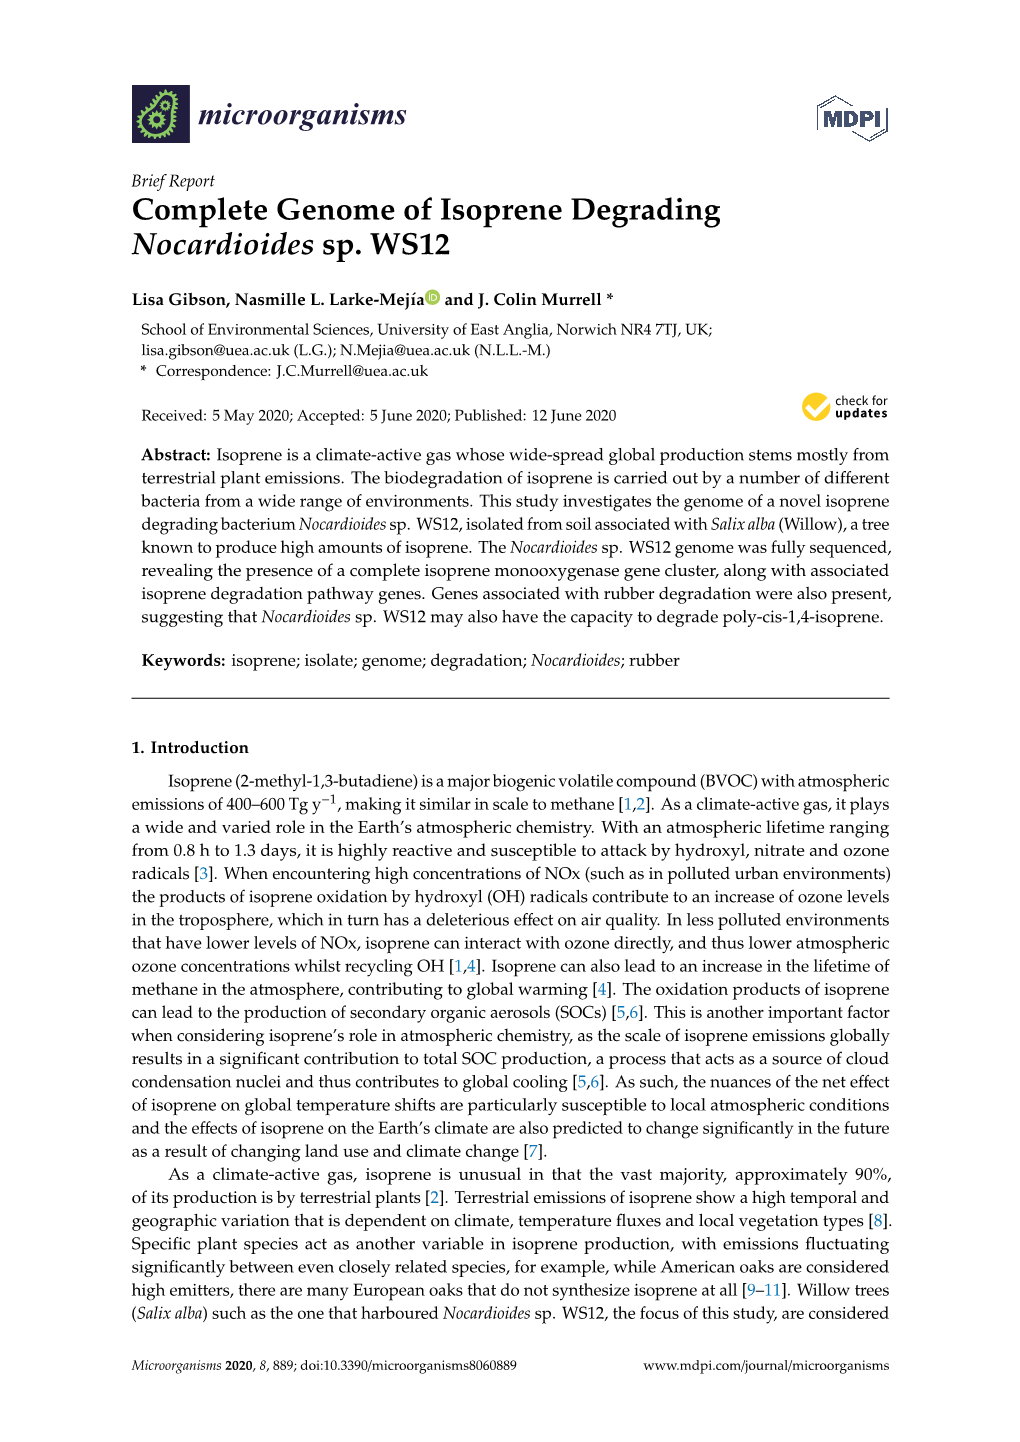 Complete Genome of Isoprene Degrading Nocardioides Sp. WS12